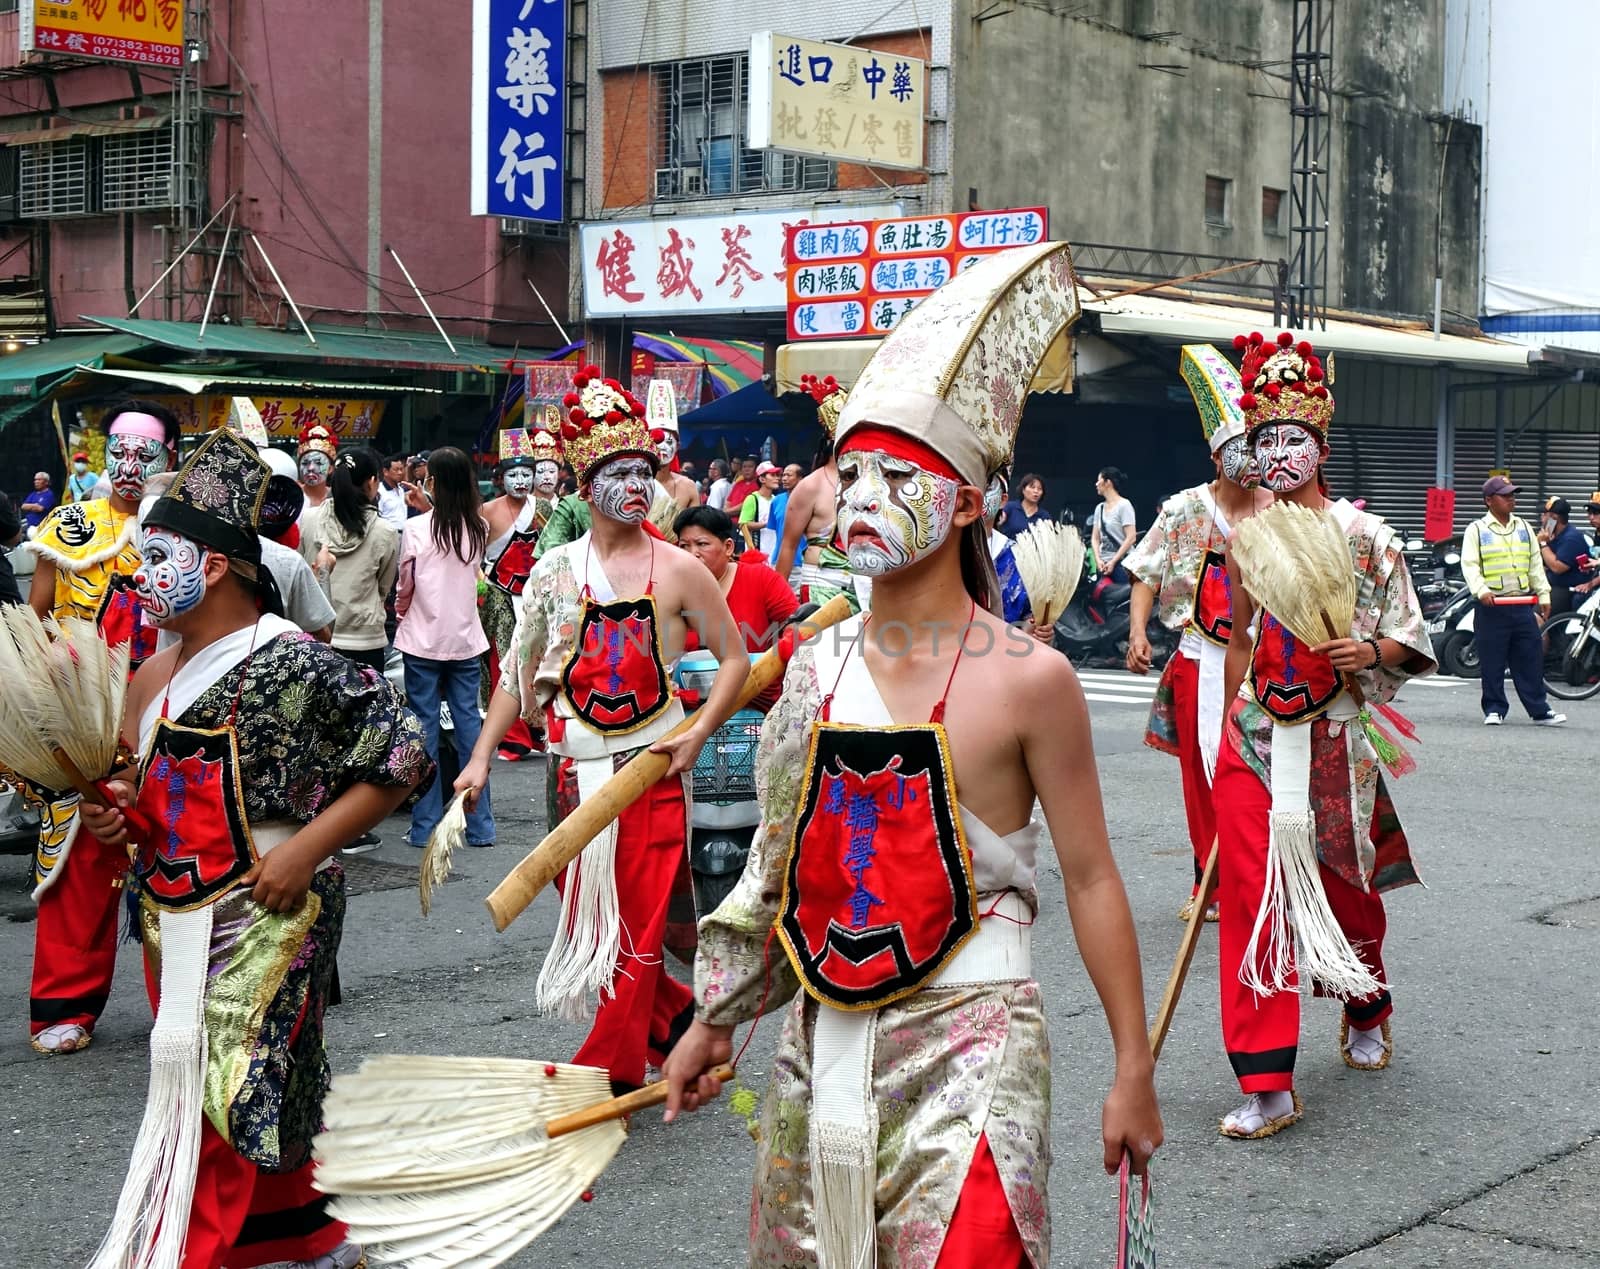 KAOHSIUNG, TAIWAN -- JULY 9, 2016: Young men in traditional costumes and painted facial masks take part in a local temple ceremony.
